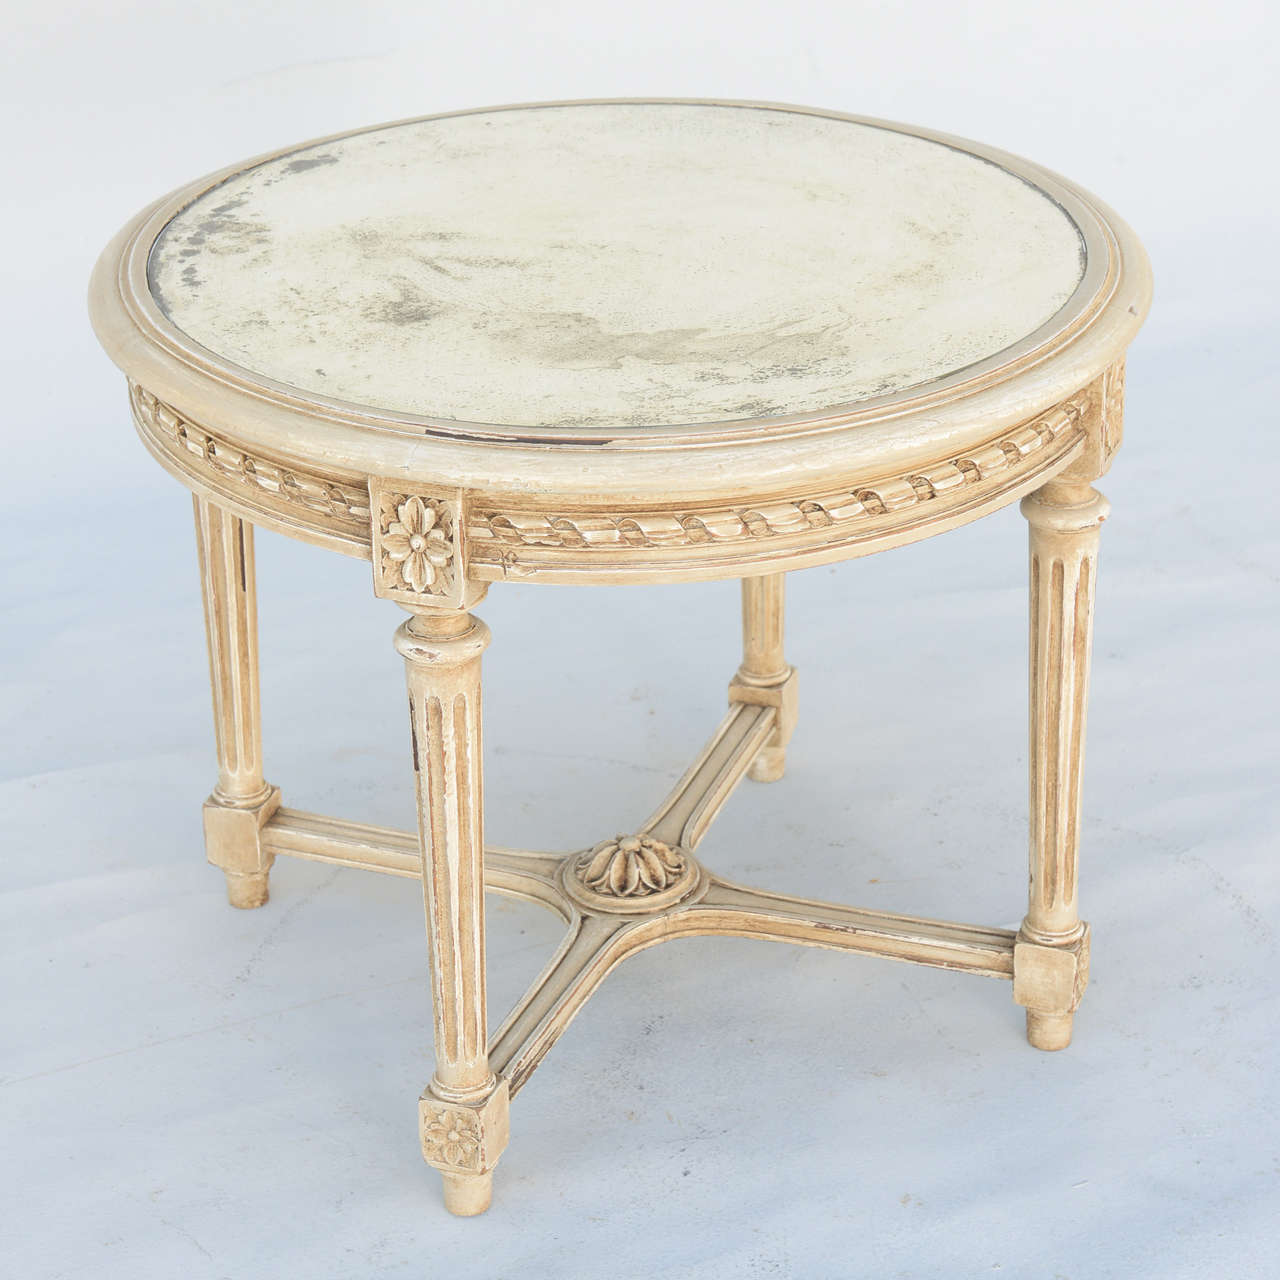 Table, with round top of distressed mirror, on carved and painted base decorated with gadrooning and beading, raised on round, fluted legs joined by double stretcher centered with a rosette.

Stock ID: D7185